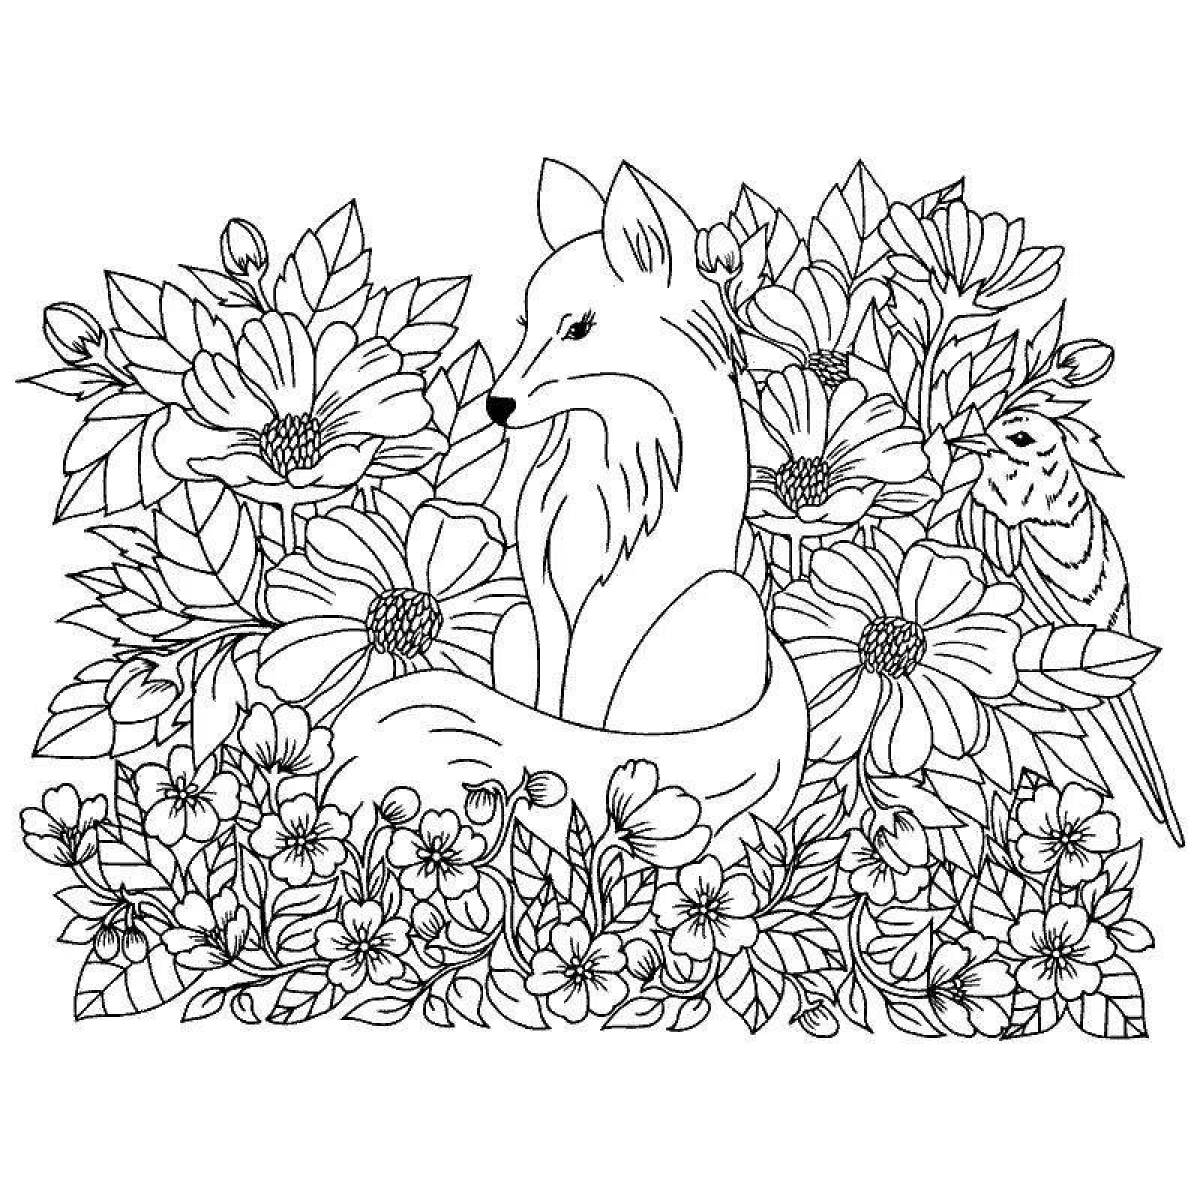 Adorable fox coloring by numbers